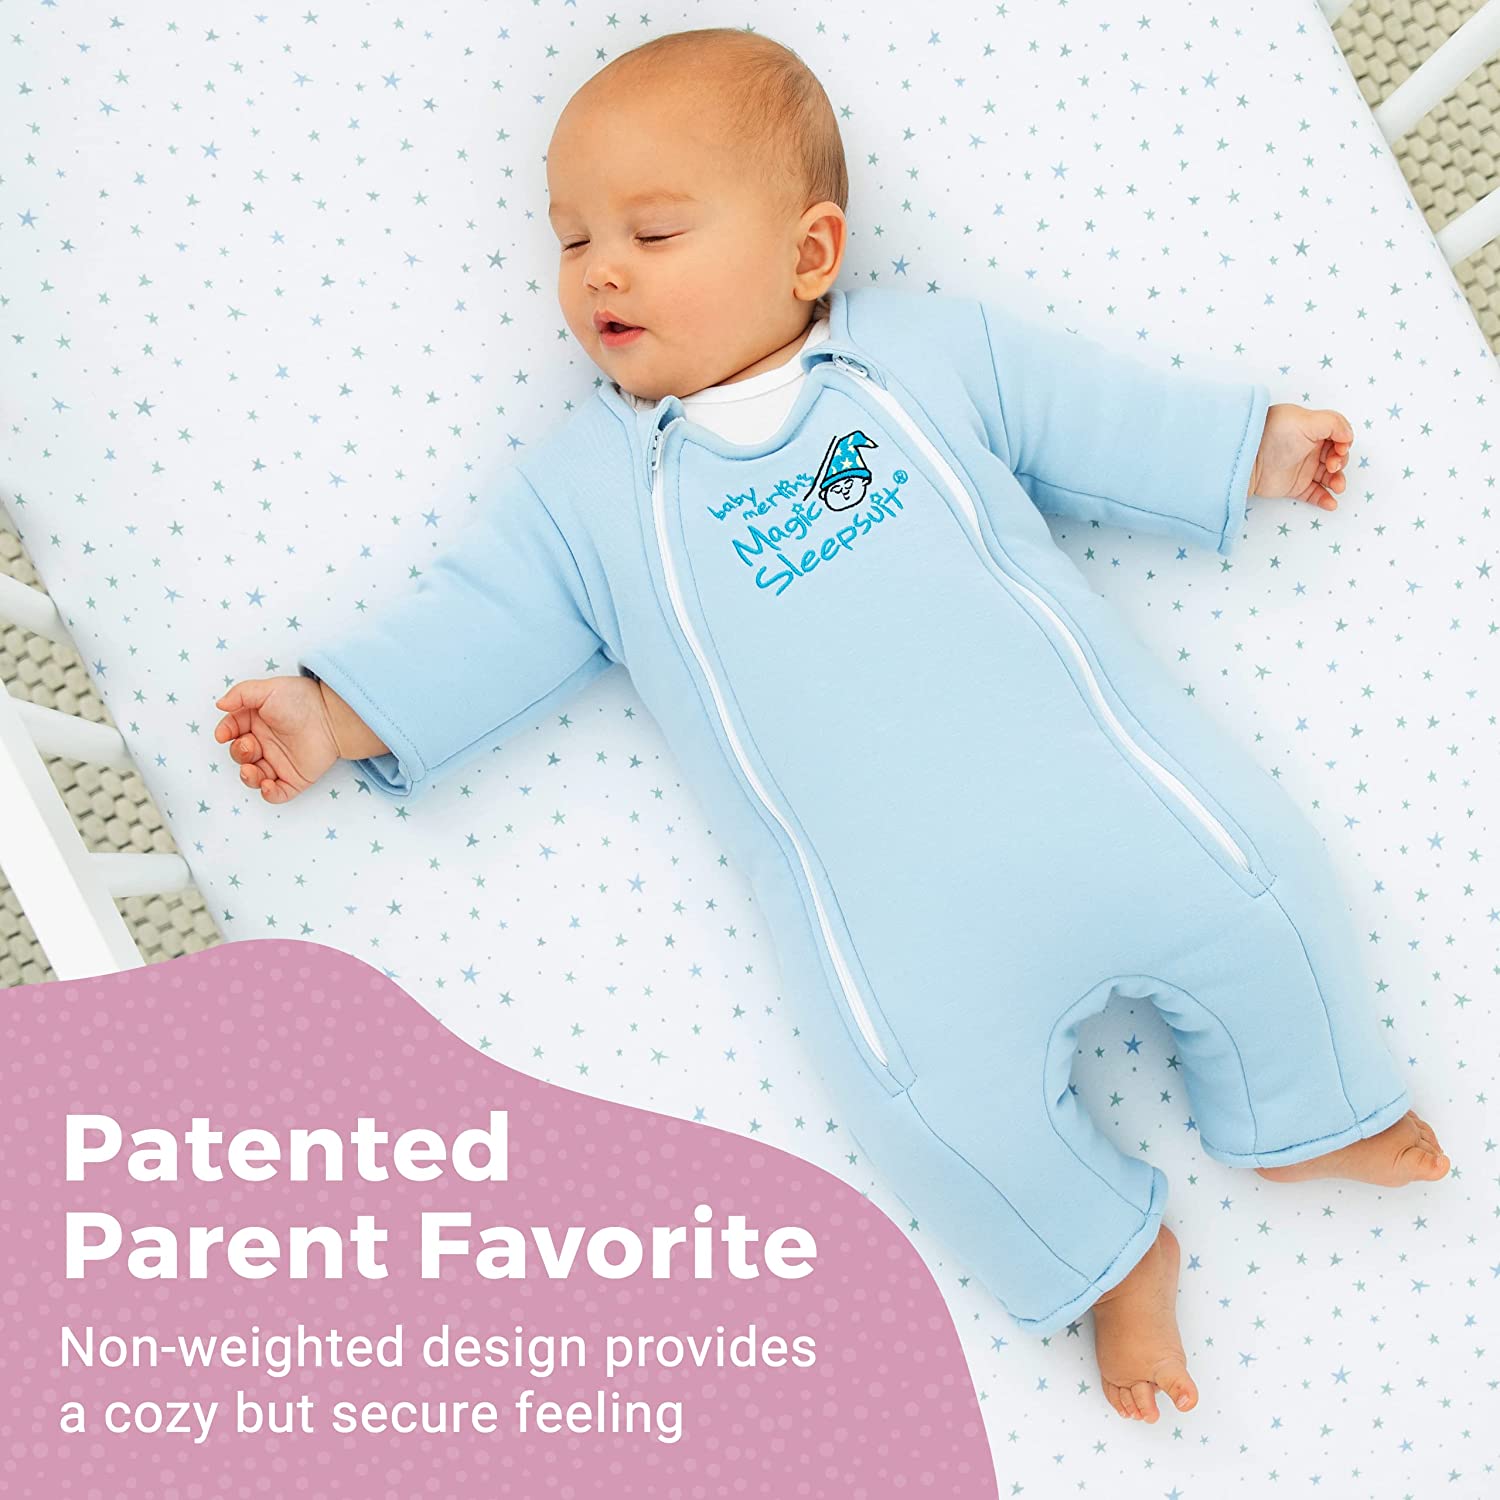 Baby Merlin's Magic Sleepsuit - 100% Cotton Baby Transition Swaddle - Baby Sleep Suit - Cream - 3-6 Months 3-6 Months Cream - image 3 of 7